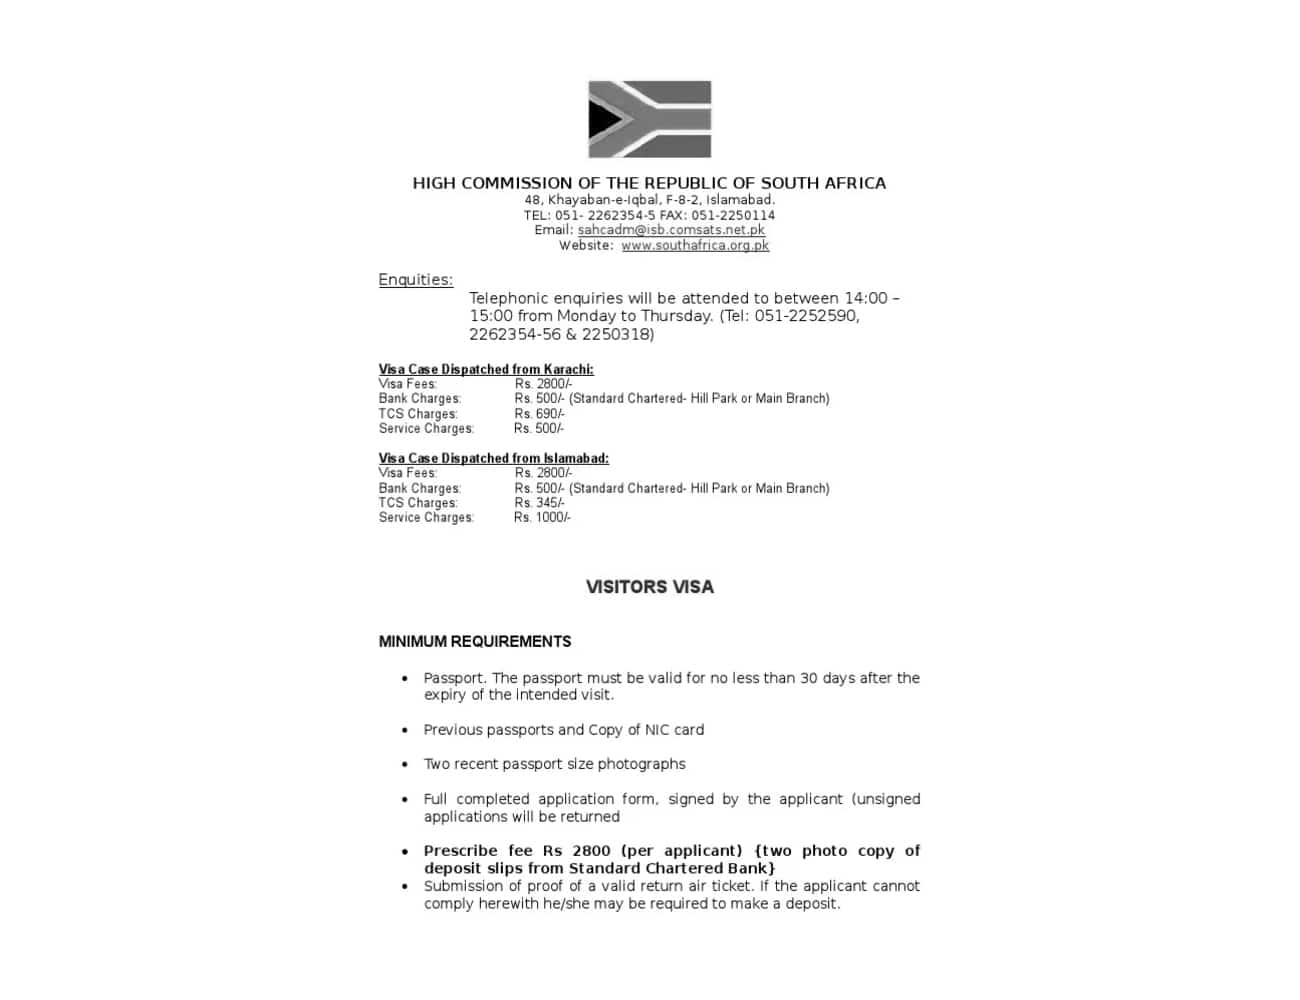 South Africa High Commission Visa Requirement Form